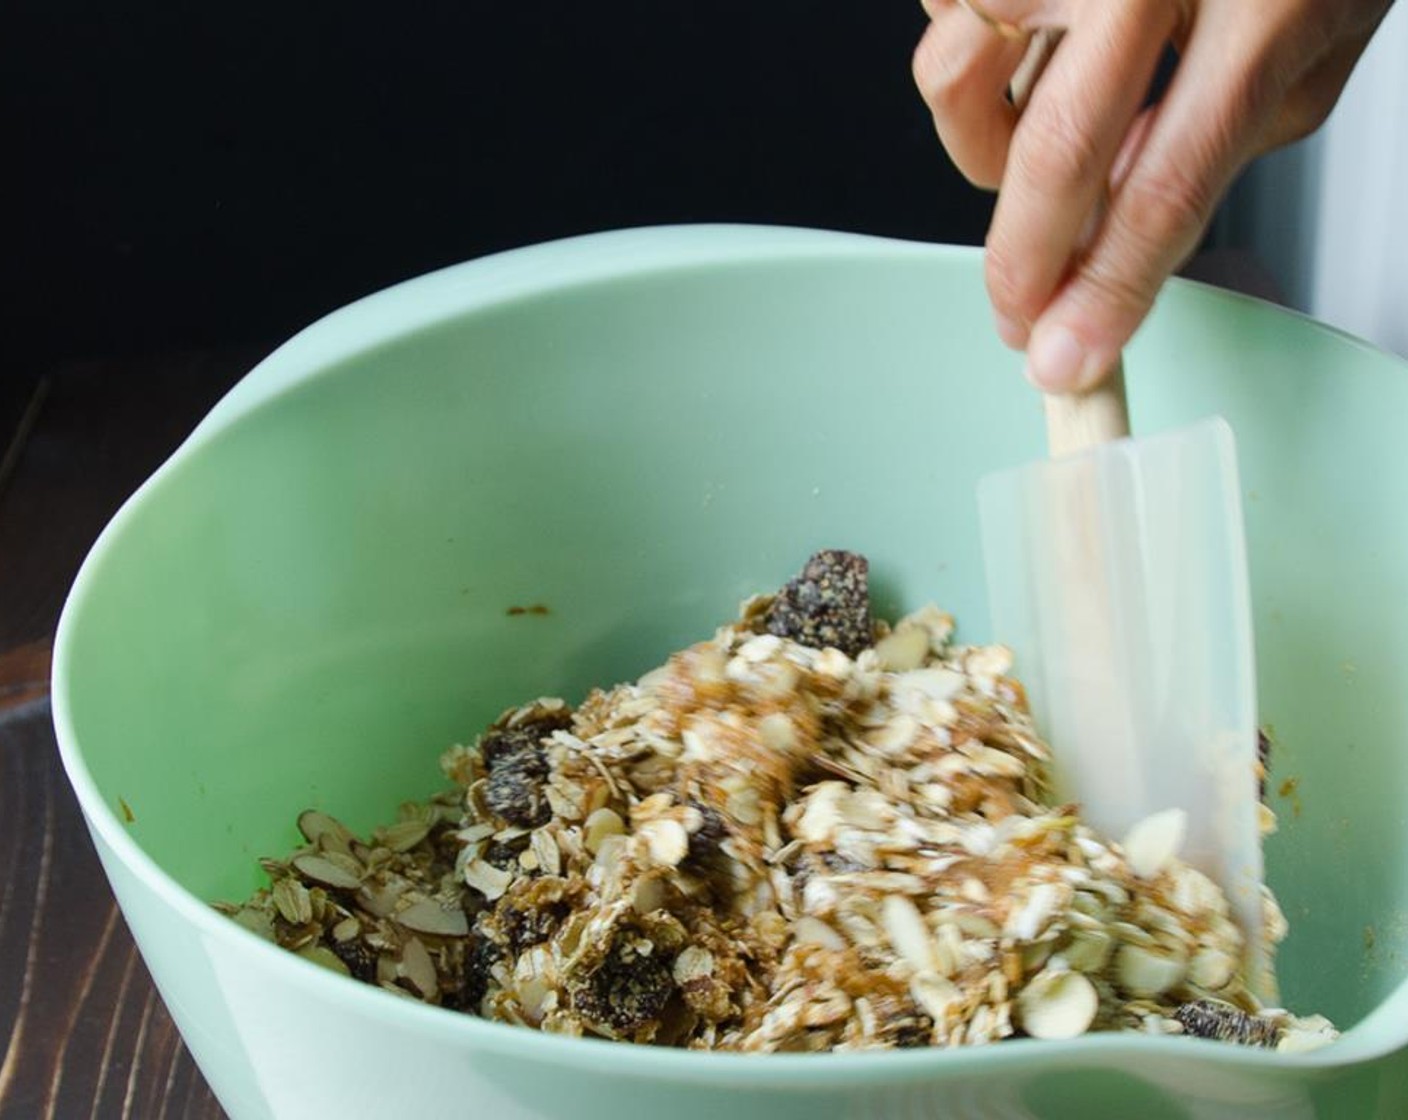 step 5 Spray your fingers with a bit of vegetable spray and rub your hands together, to prevent sticking. Turn the granola onto your prepared pan and use your fingertips to press the mixture evenly into the pan.